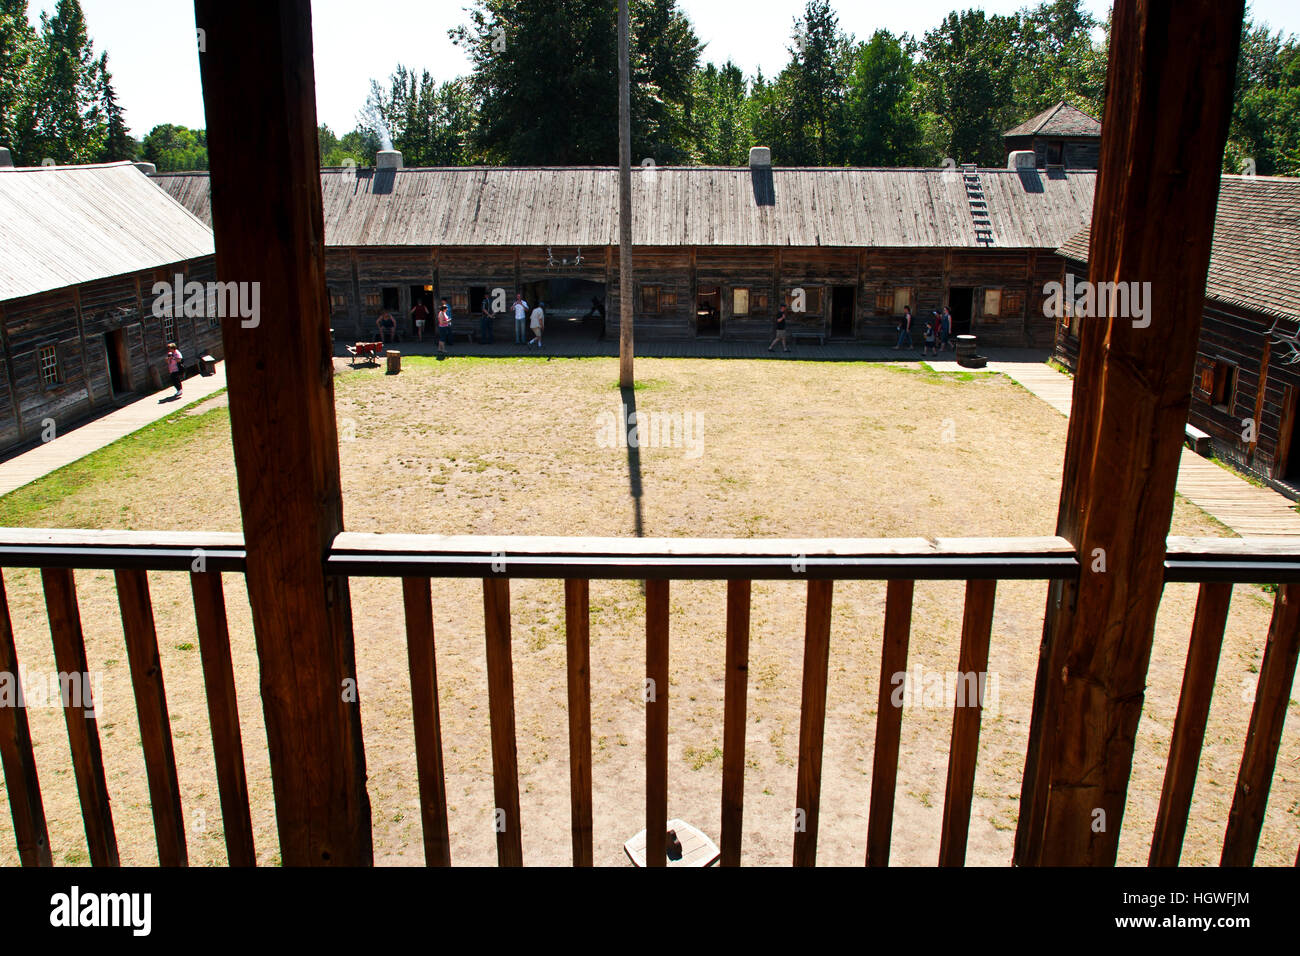 Fort Edmonton, Alberta, Canada, courtyard parade field o the nineteenth and early 20th century British fort that became Edmonton Stock Photo